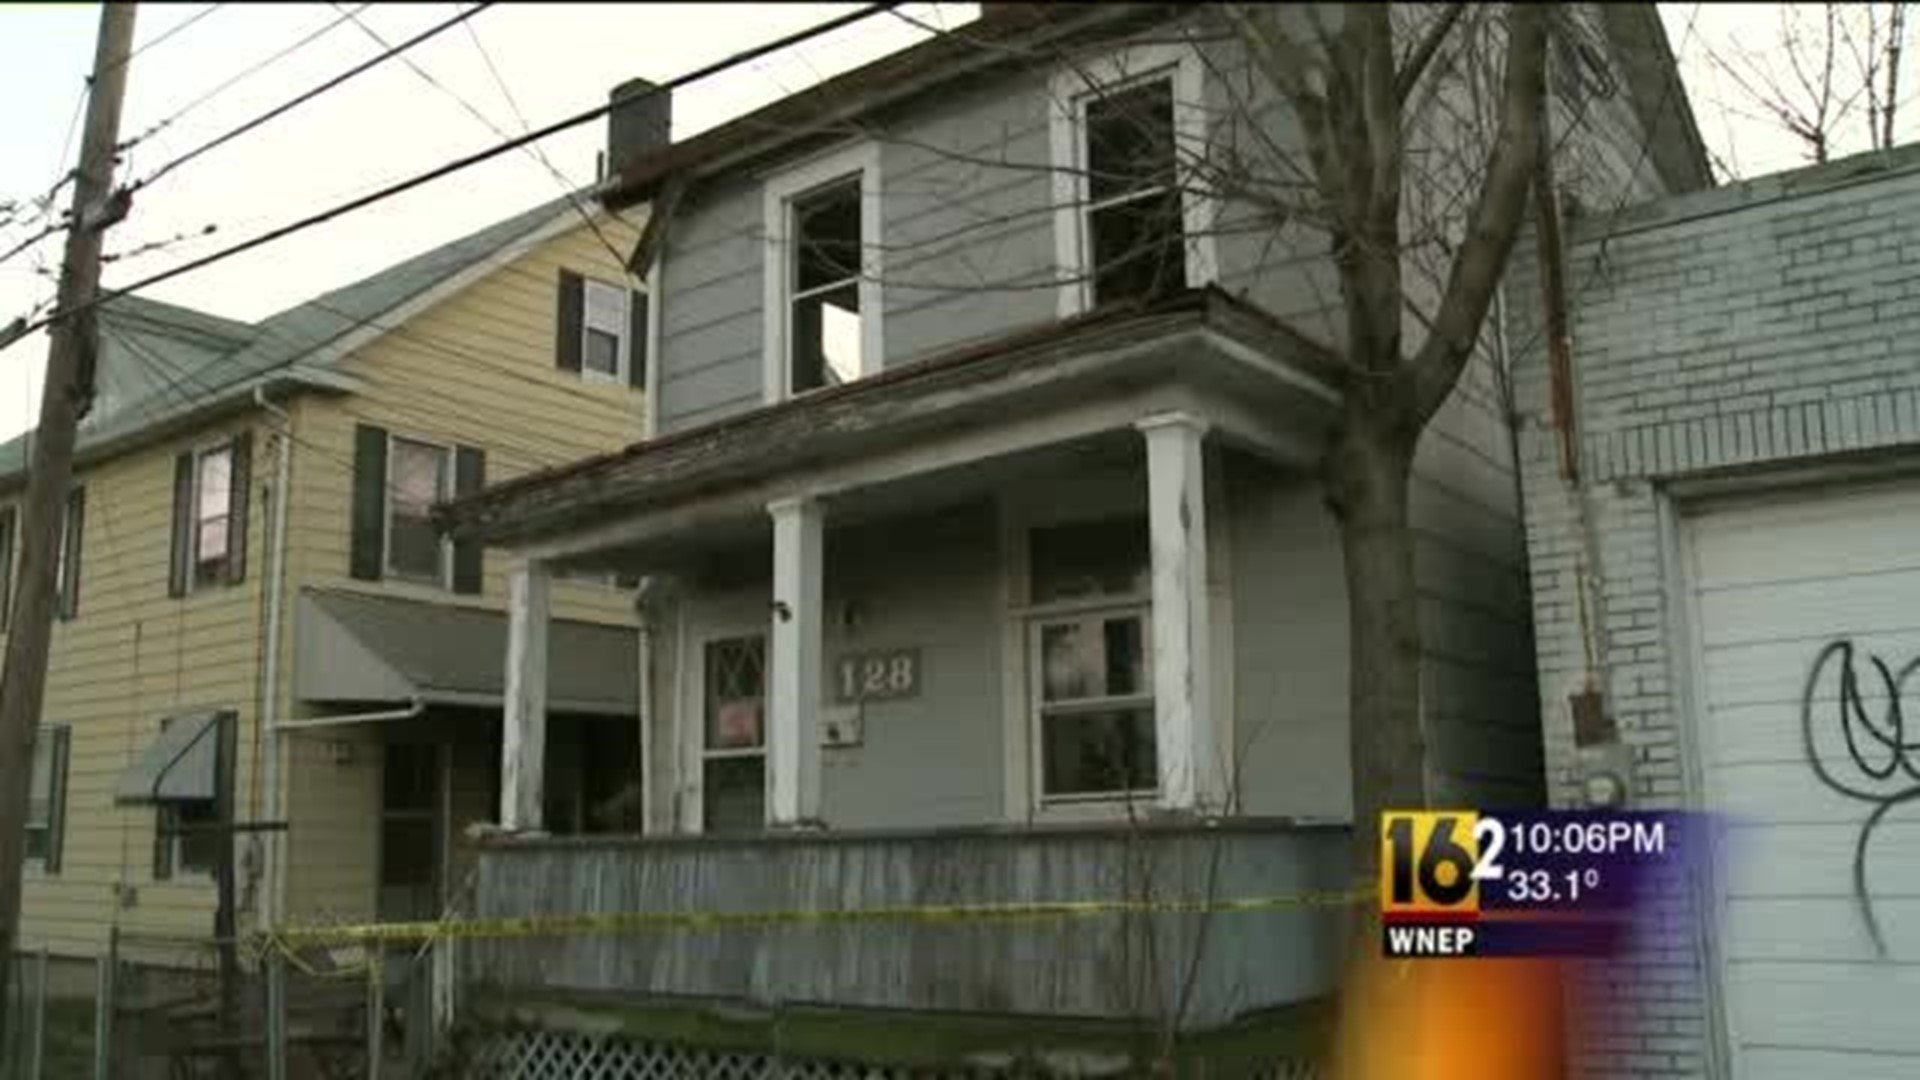 Blaze At A Vacant, Condemned House In Hazleton